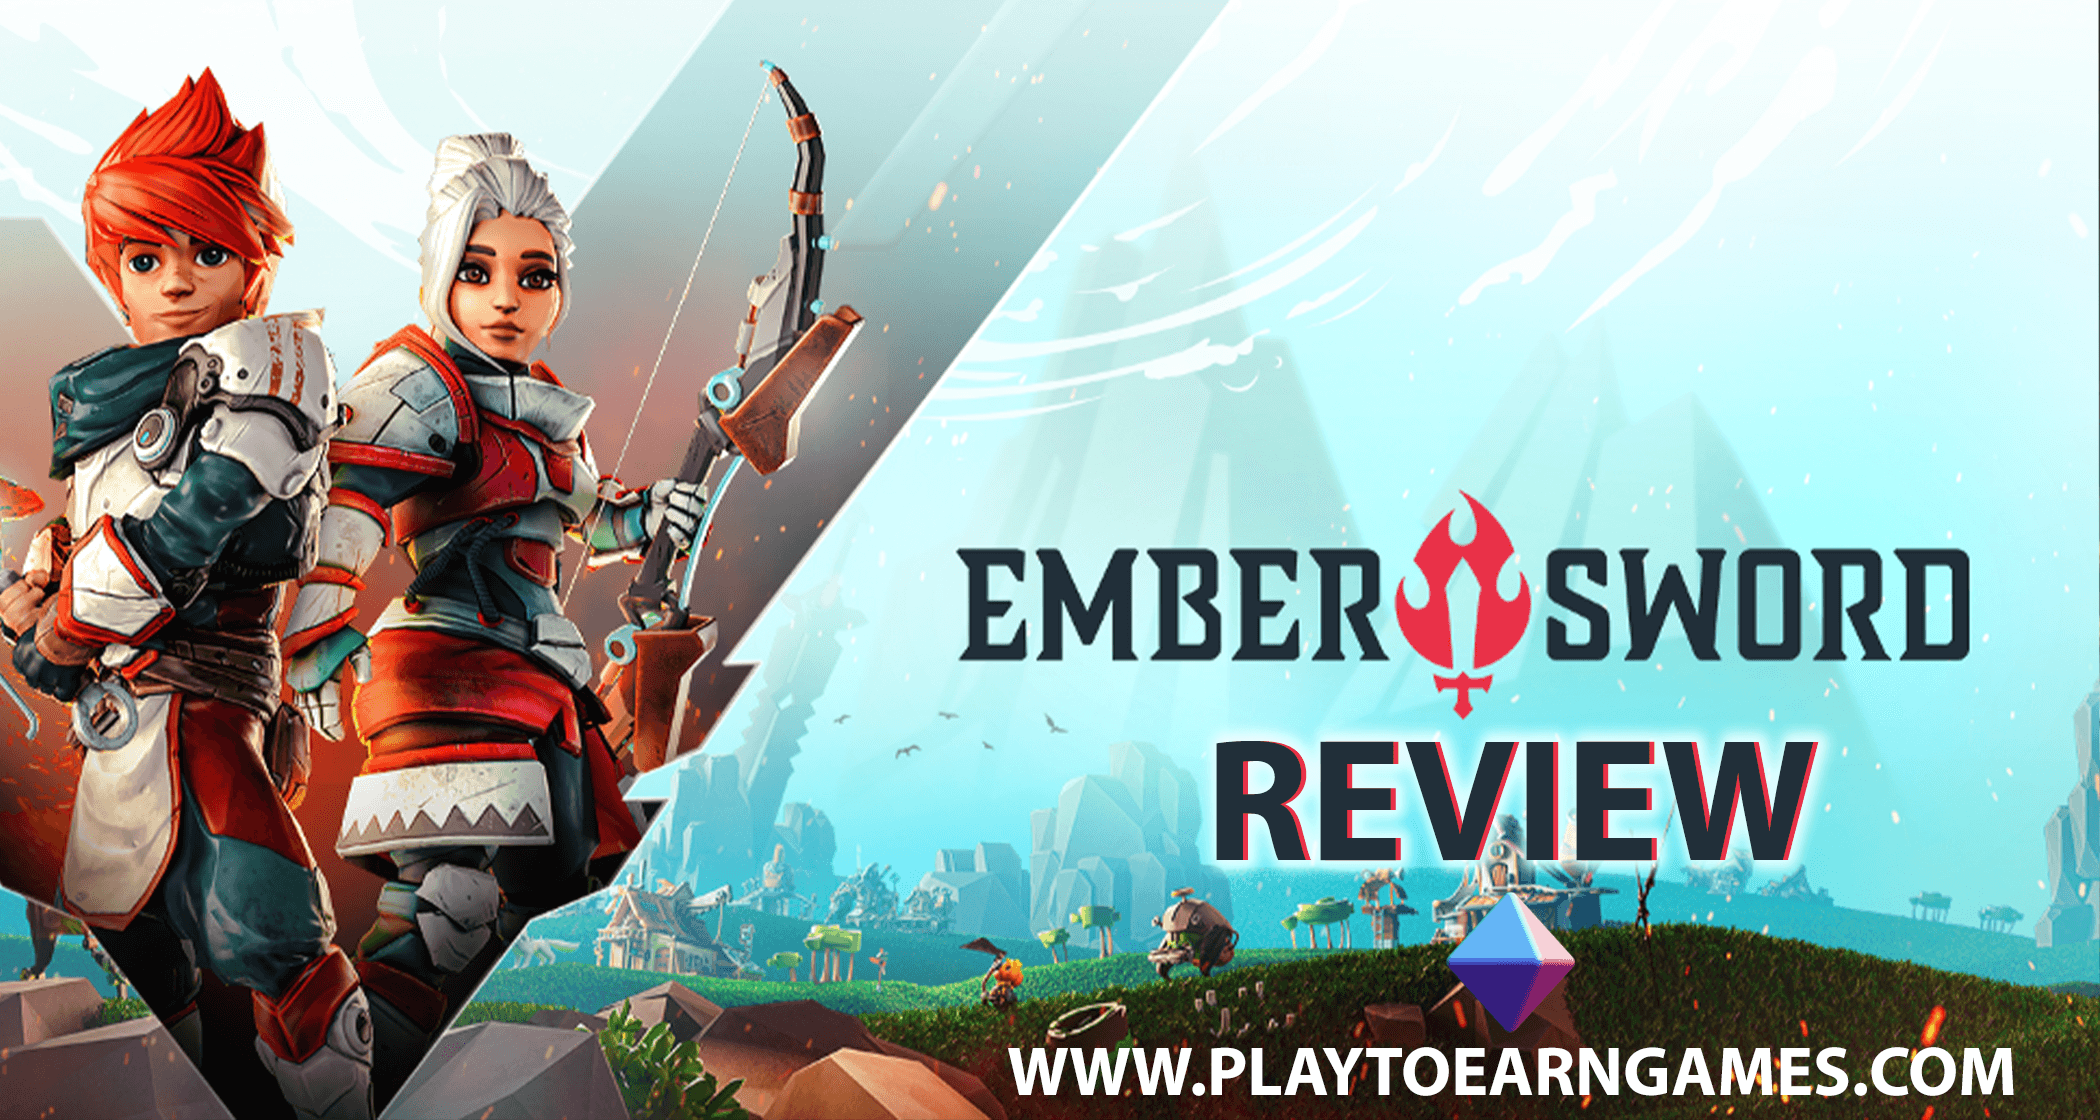 Ember Sword - Video Game Review